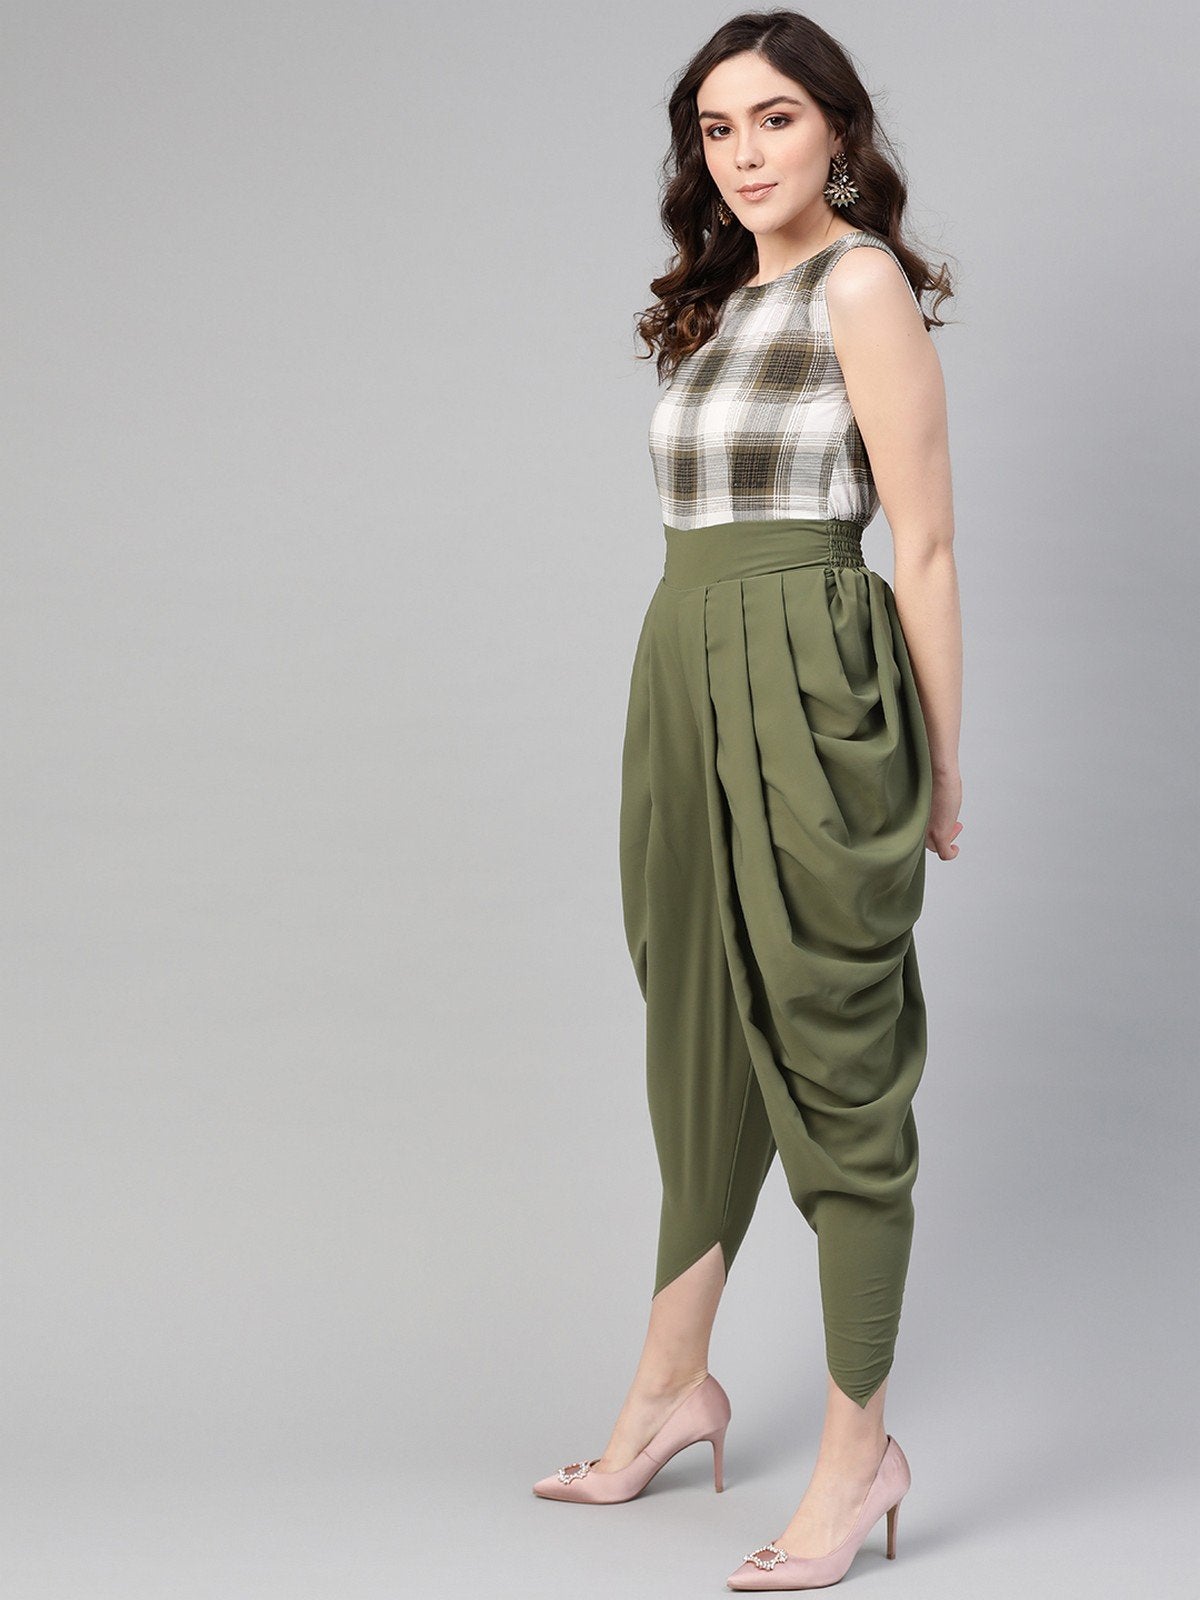 Women's Olive Checkered Cowl Jumpsuit - Pannkh